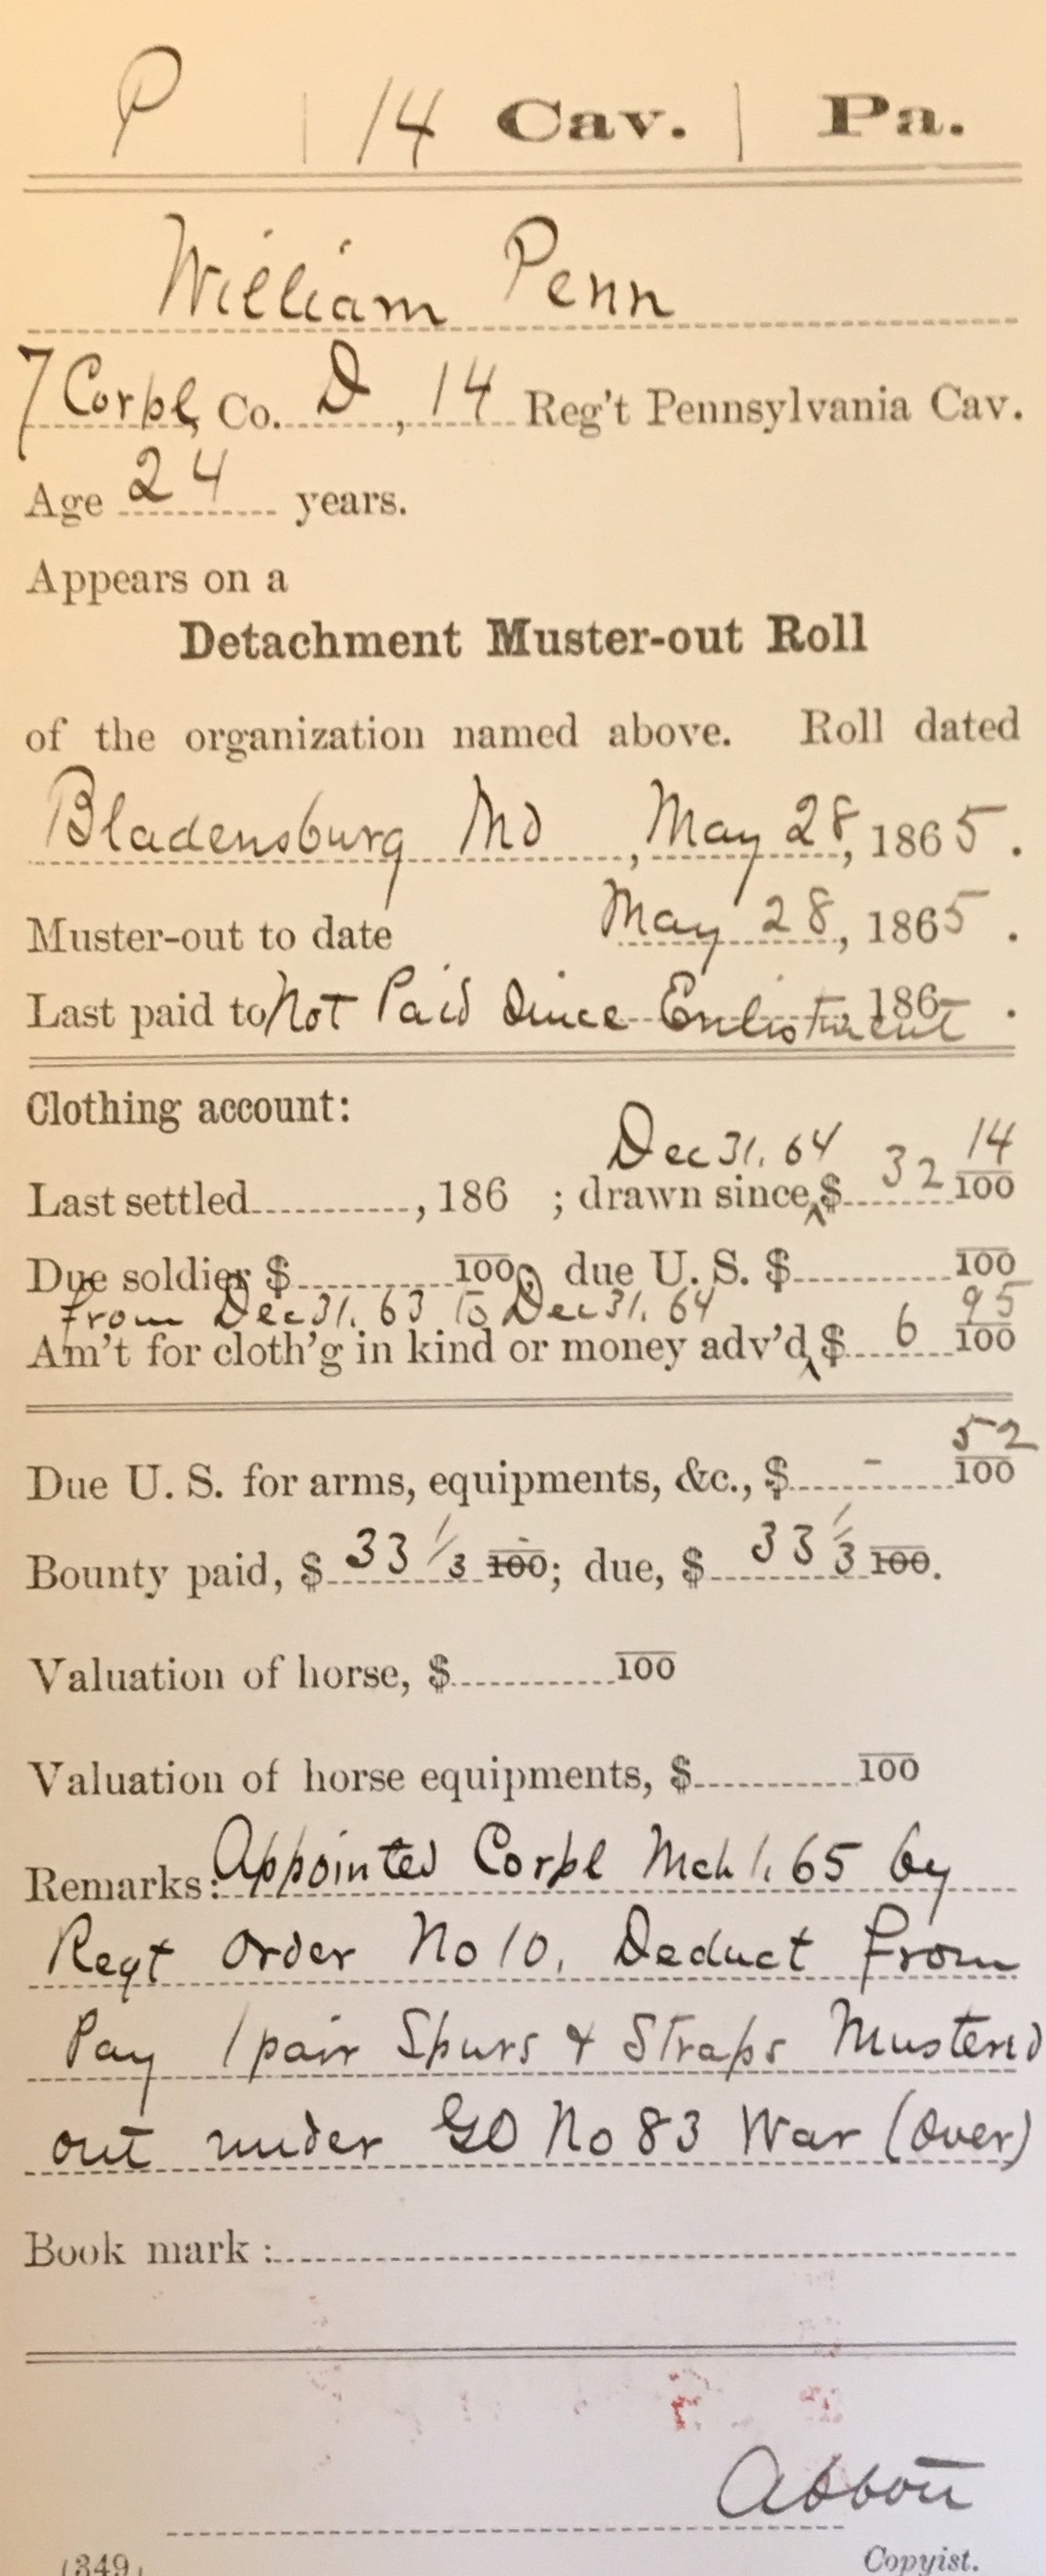 Complete Set of Civil War records for your Union Army Soldier (pension, service records, carded medical records)